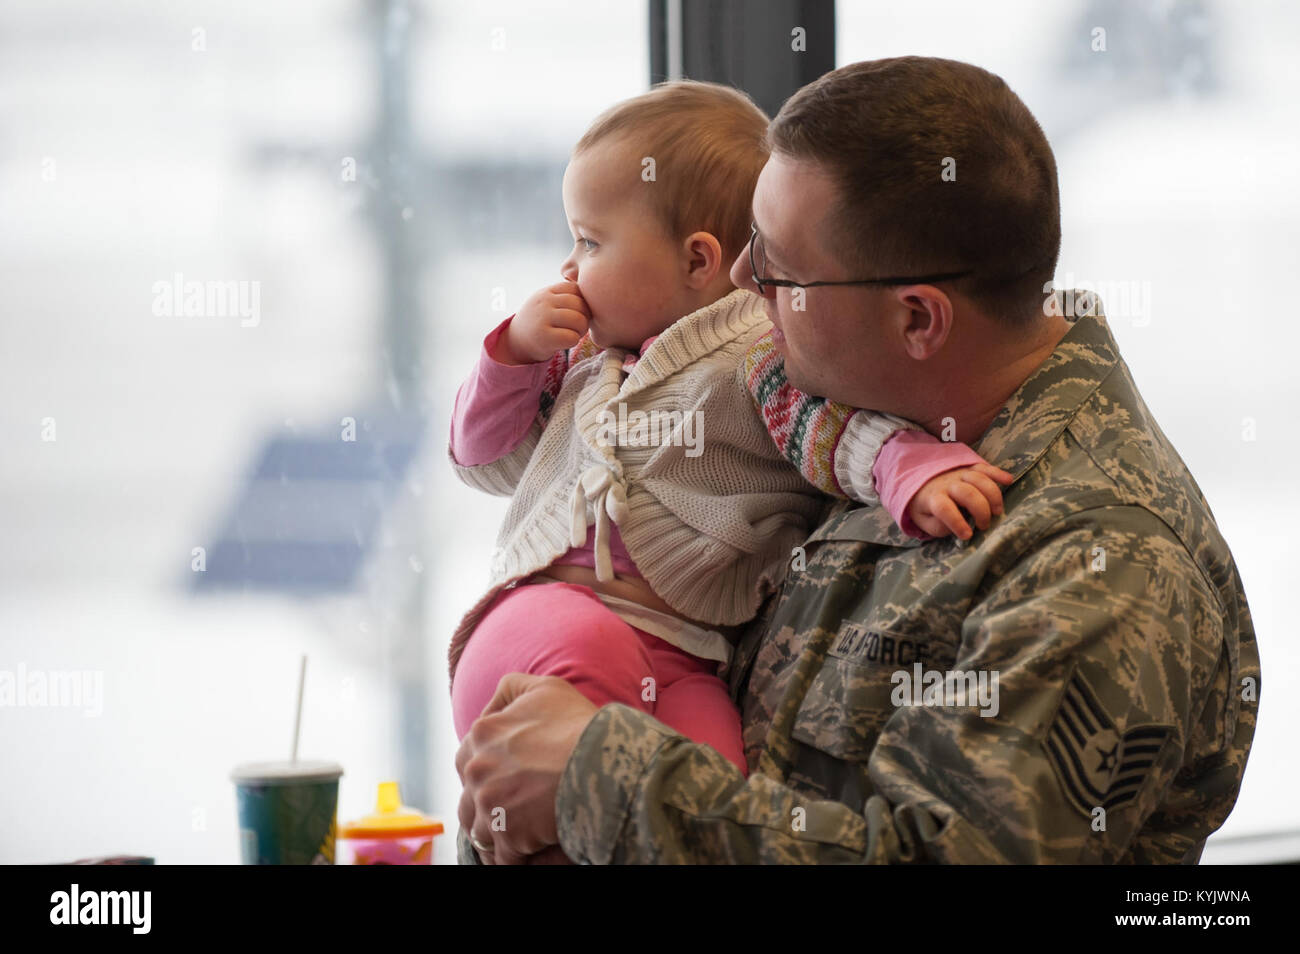 Tech. Sgt. Lee Stanley, an aircraft structural engineer in the 123rd Airlift Wing, spends some quiet time with his daughter, Madelyn, at the Kentucky Air National Guard Base in Louisville, Ky., Feb. 21, 2015. Stanley is deploying to the Persian Gulf in support of Operation Freedom's Sentinel, during which more than 110 members of the Kentucky Air Guard will conduct an airlift mission to fly troops and cargo across the U.S. Central Command Area of Responsibility. (U.S. Air National Guard photo by Maj. Dale Greer) Stock Photo